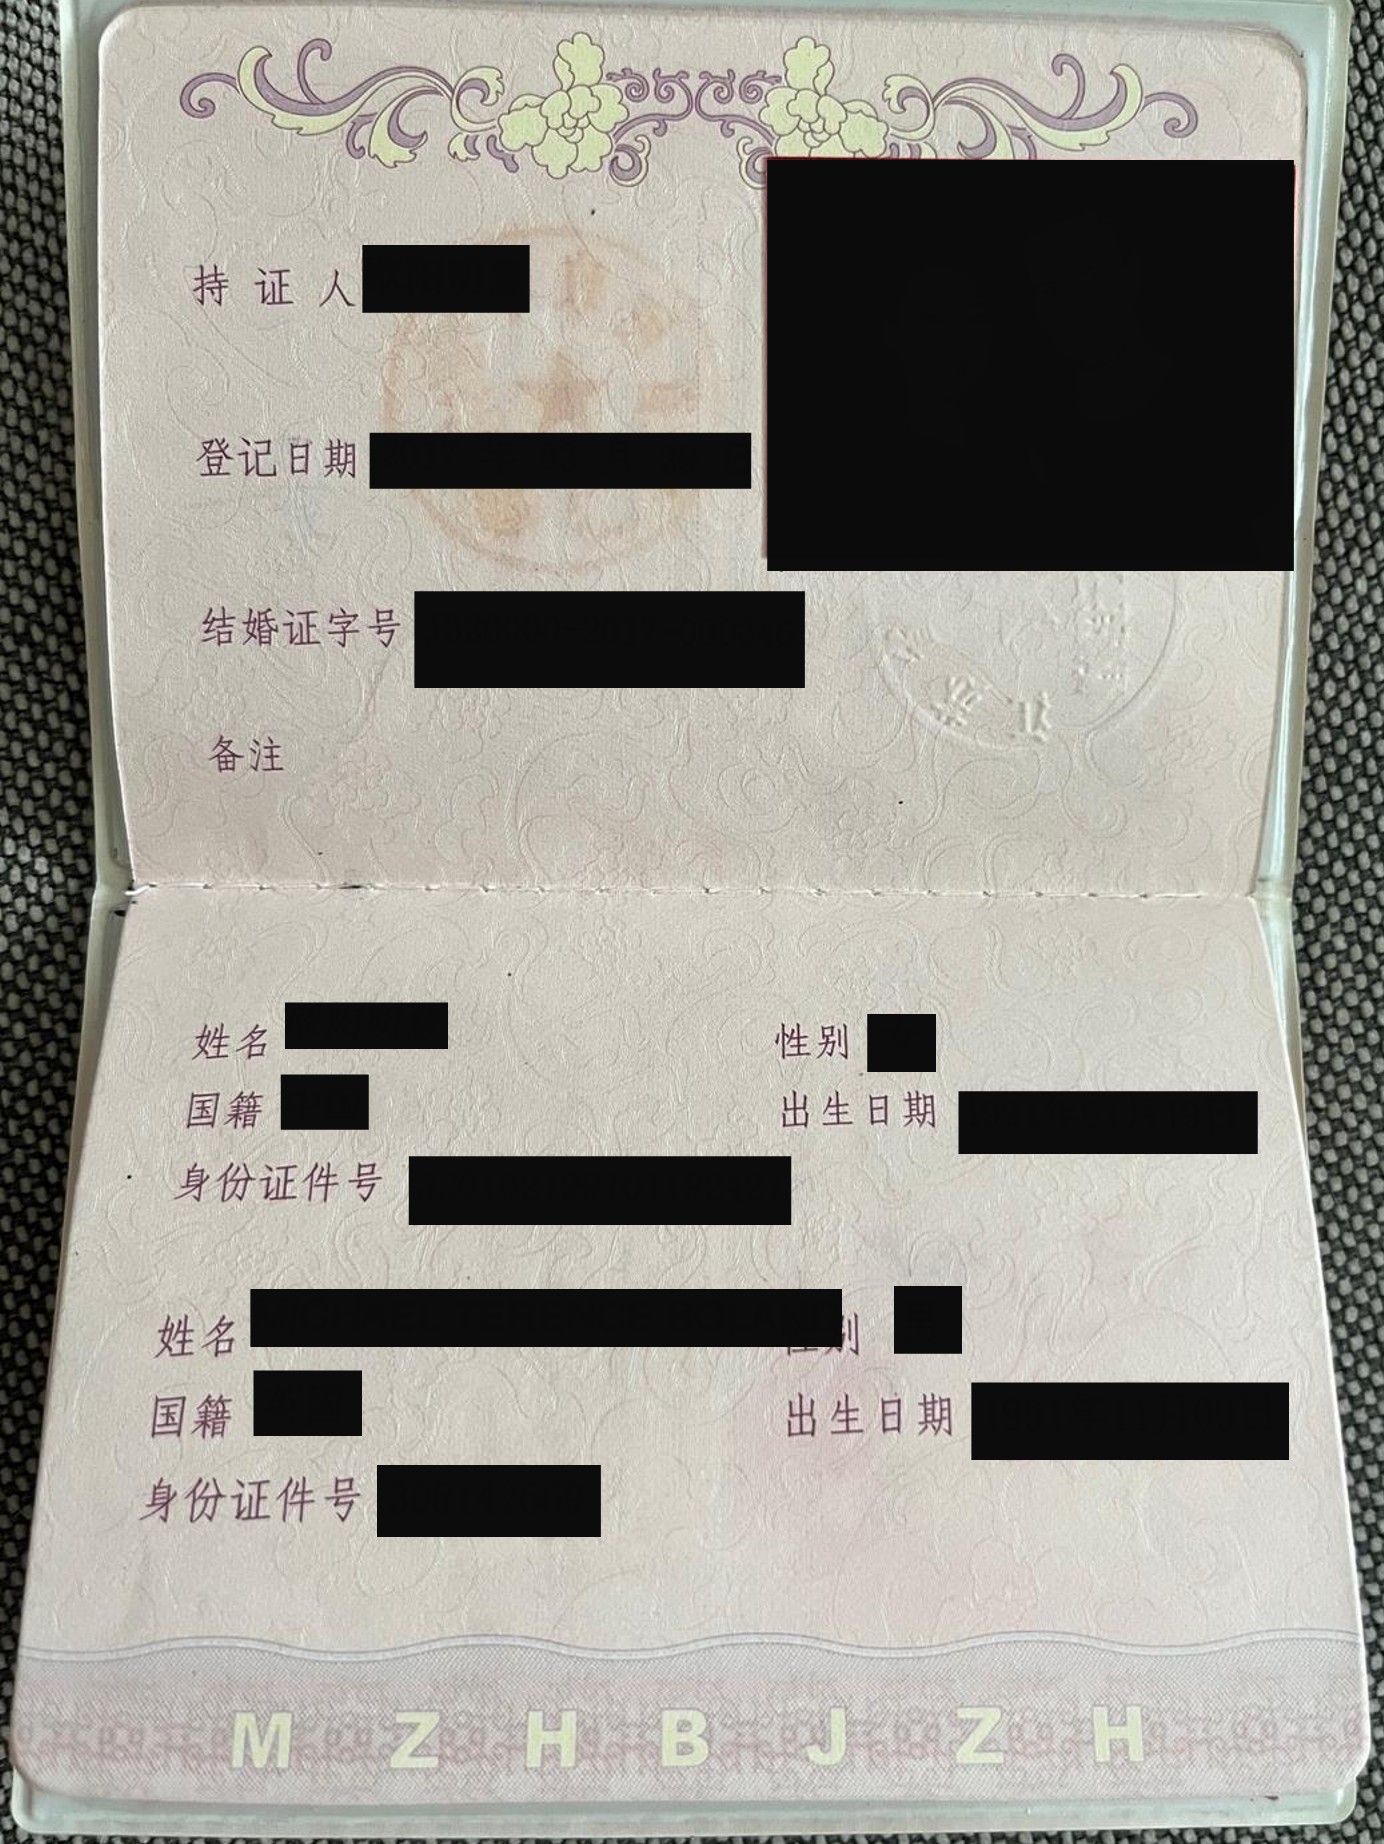 Chinese Marriage Certificate translation into English